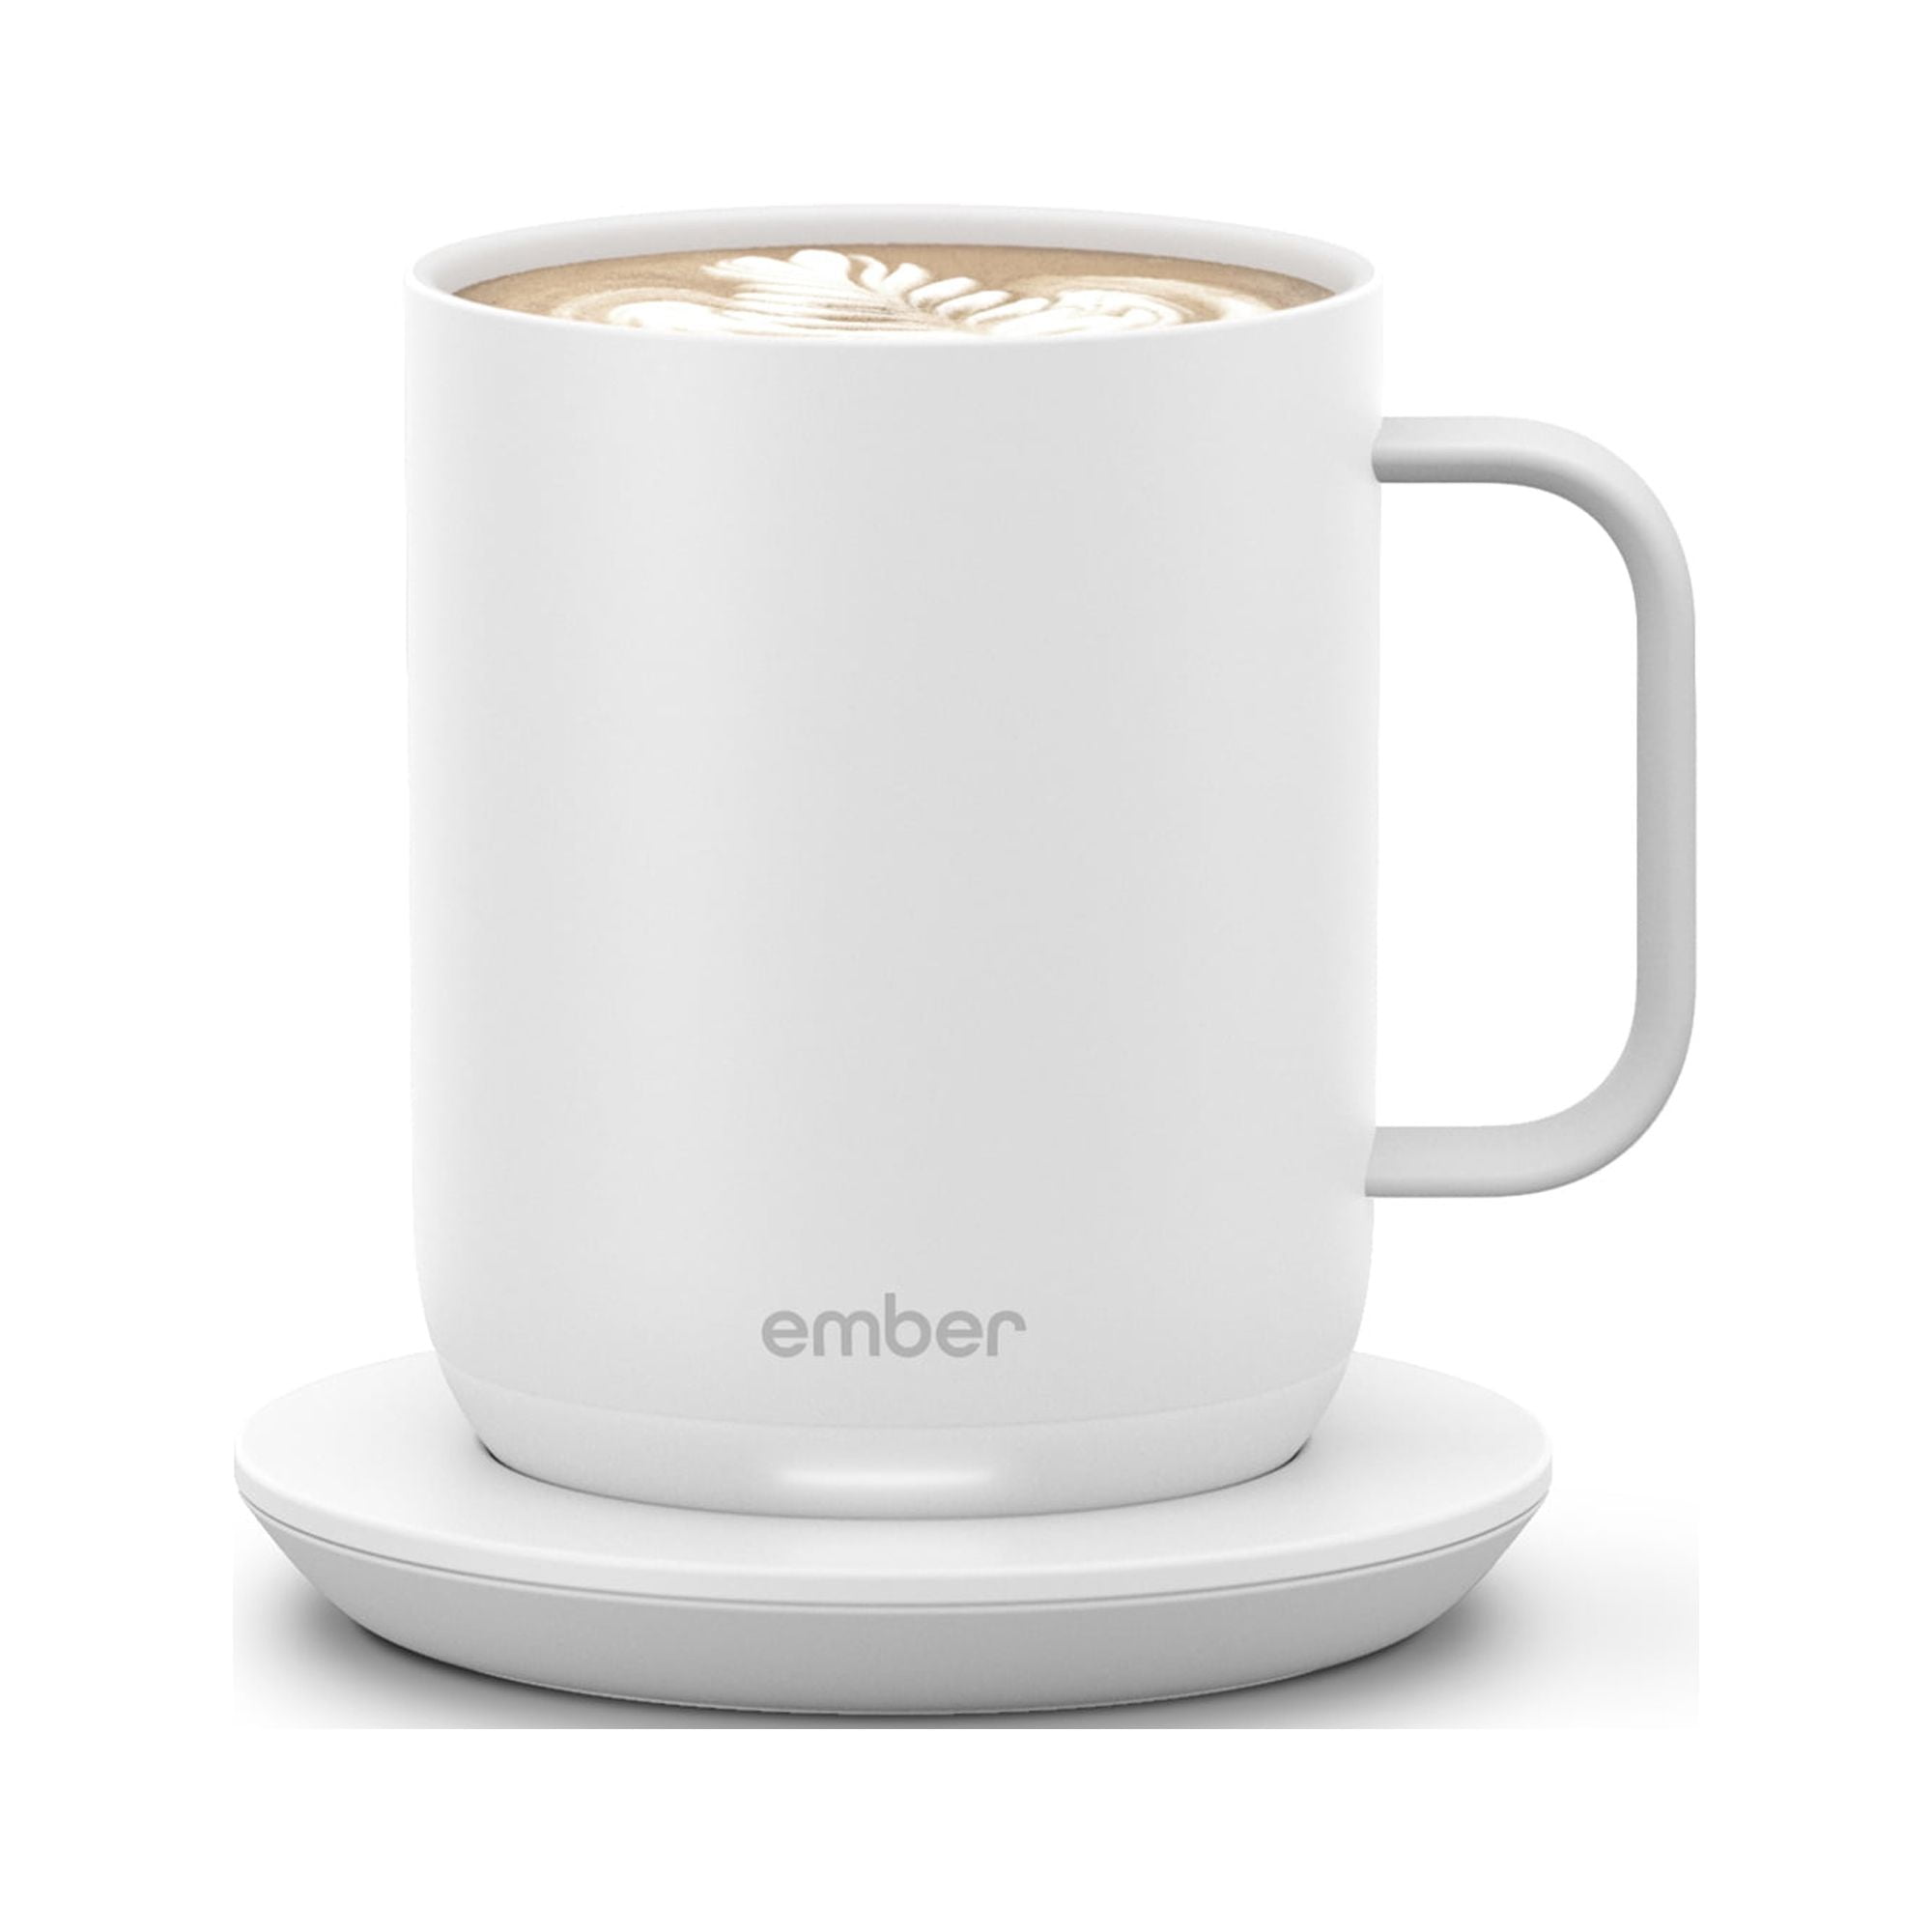  Coffee Mug Lids for Ember 10 oz Temperature Control Smart Mug  2, Splash Proof Open - Close Slide Lid, Coffee Mug Lid Replacement with  Sealing Silicone (Transparent 10 oz, 1): Home & Kitchen